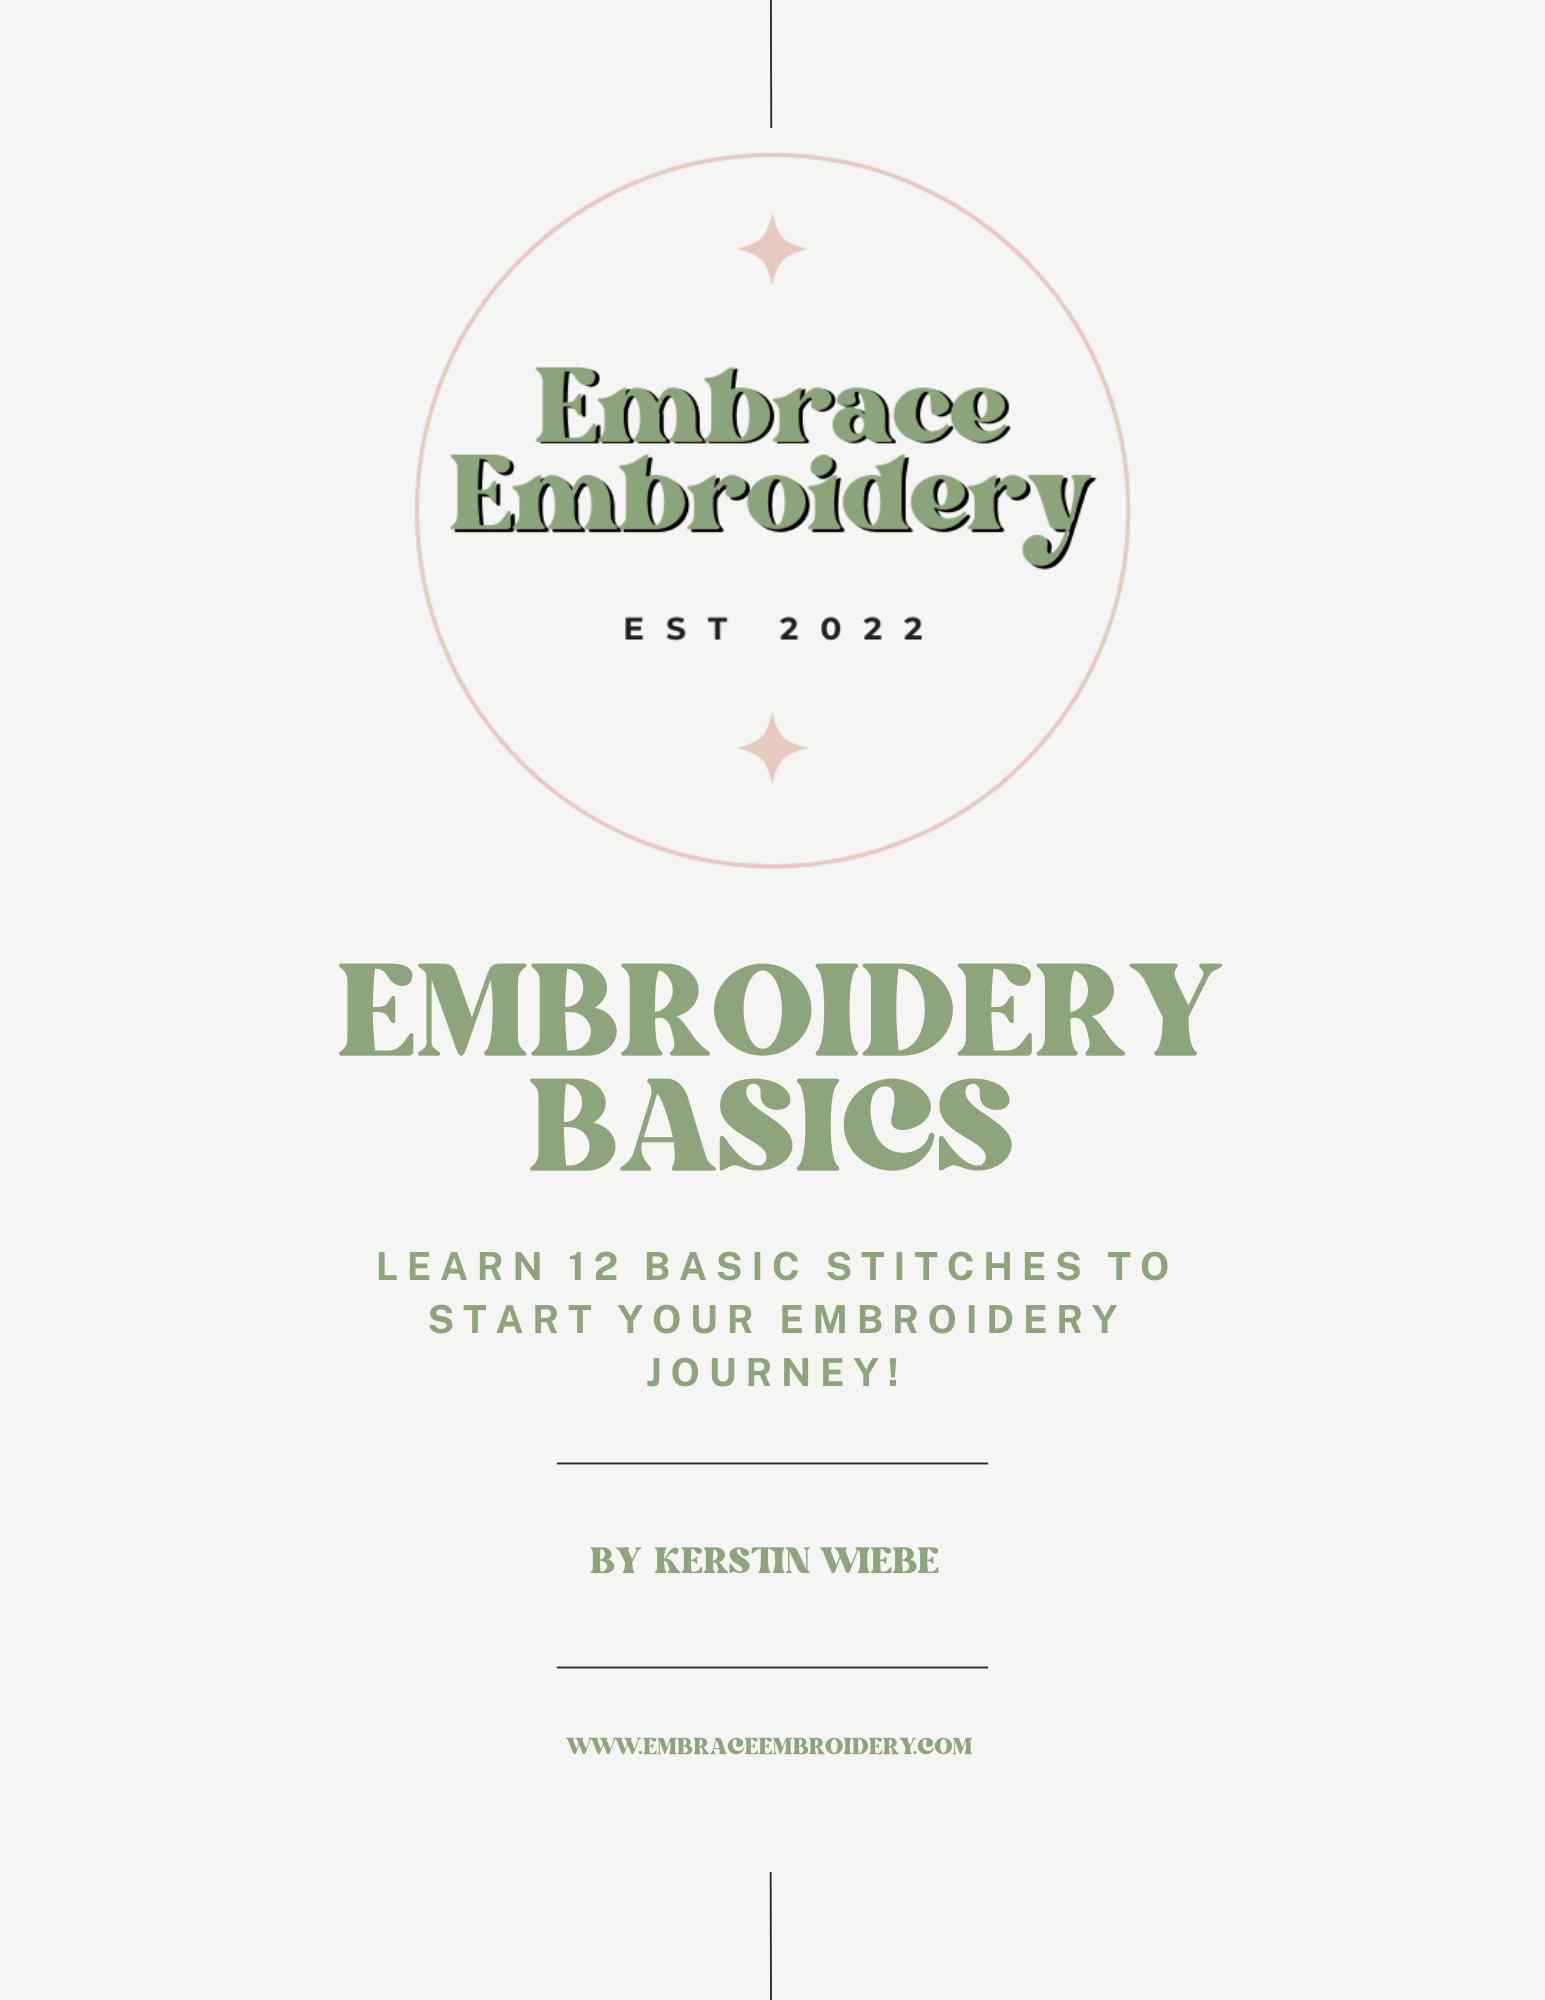 The Complete Book of Embroidery and Embroidery Stitches [Book]